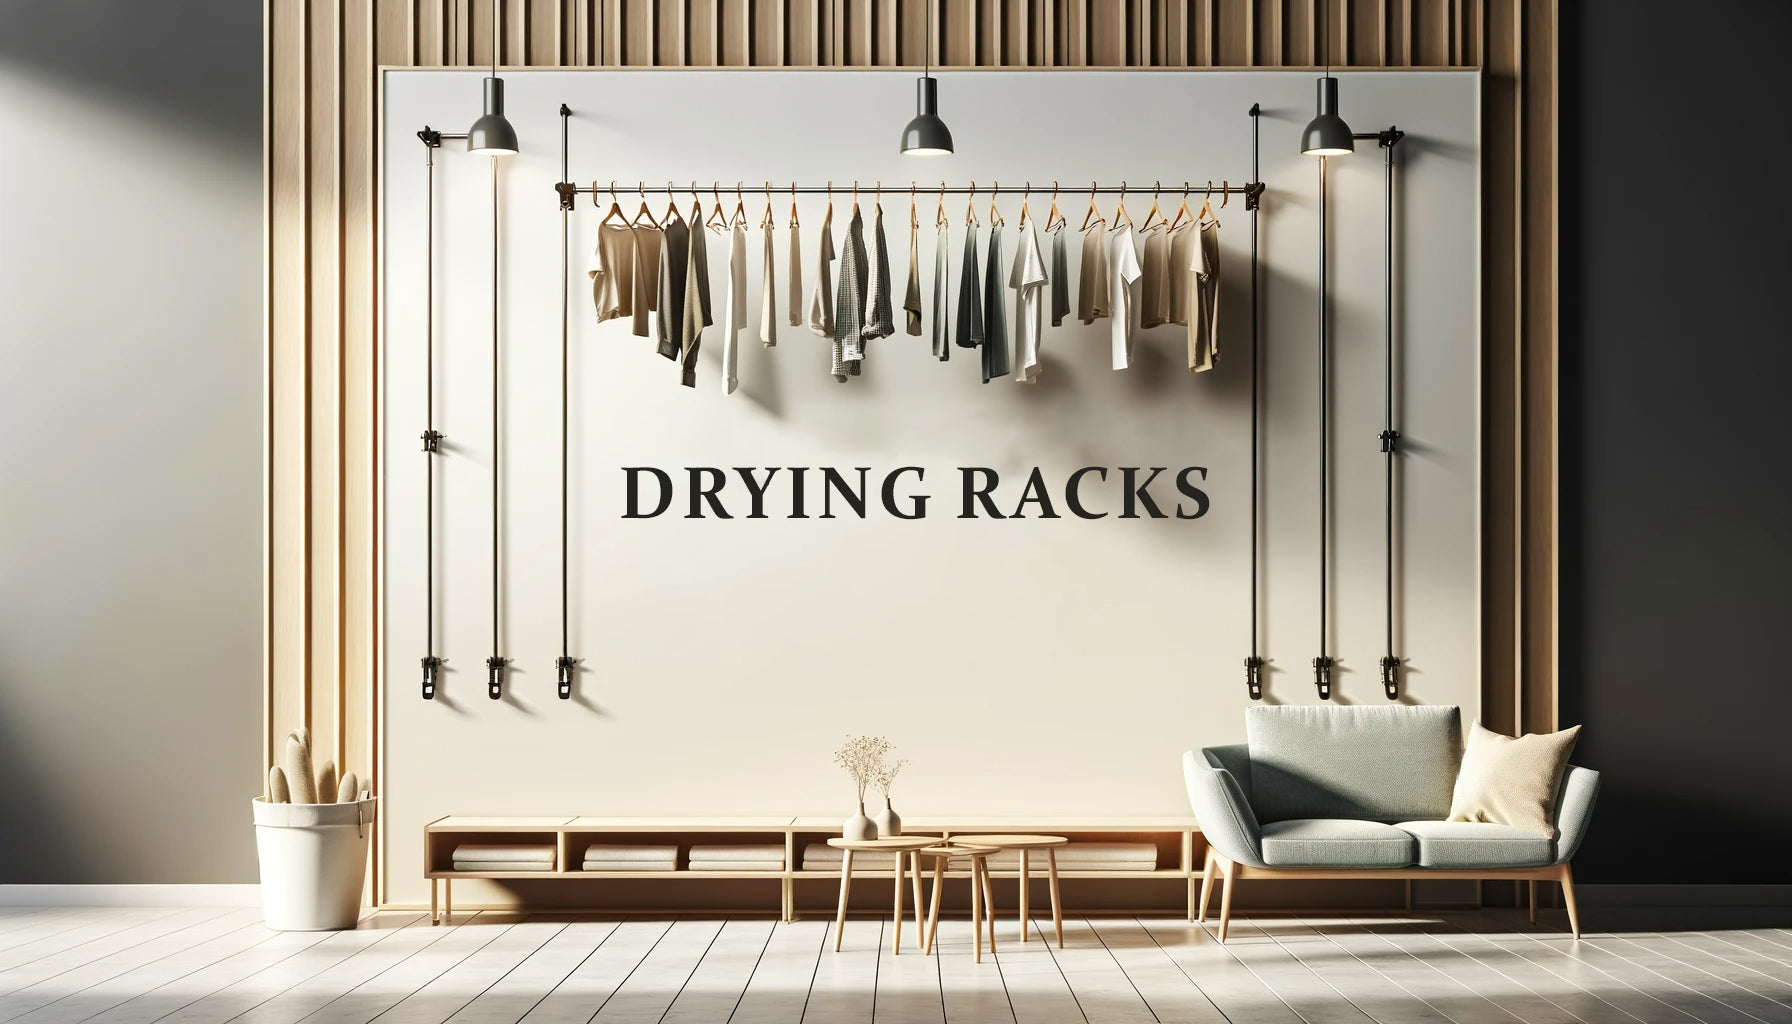 Maximize your laundry efficiency with our versatile Clothes Drying Racks.